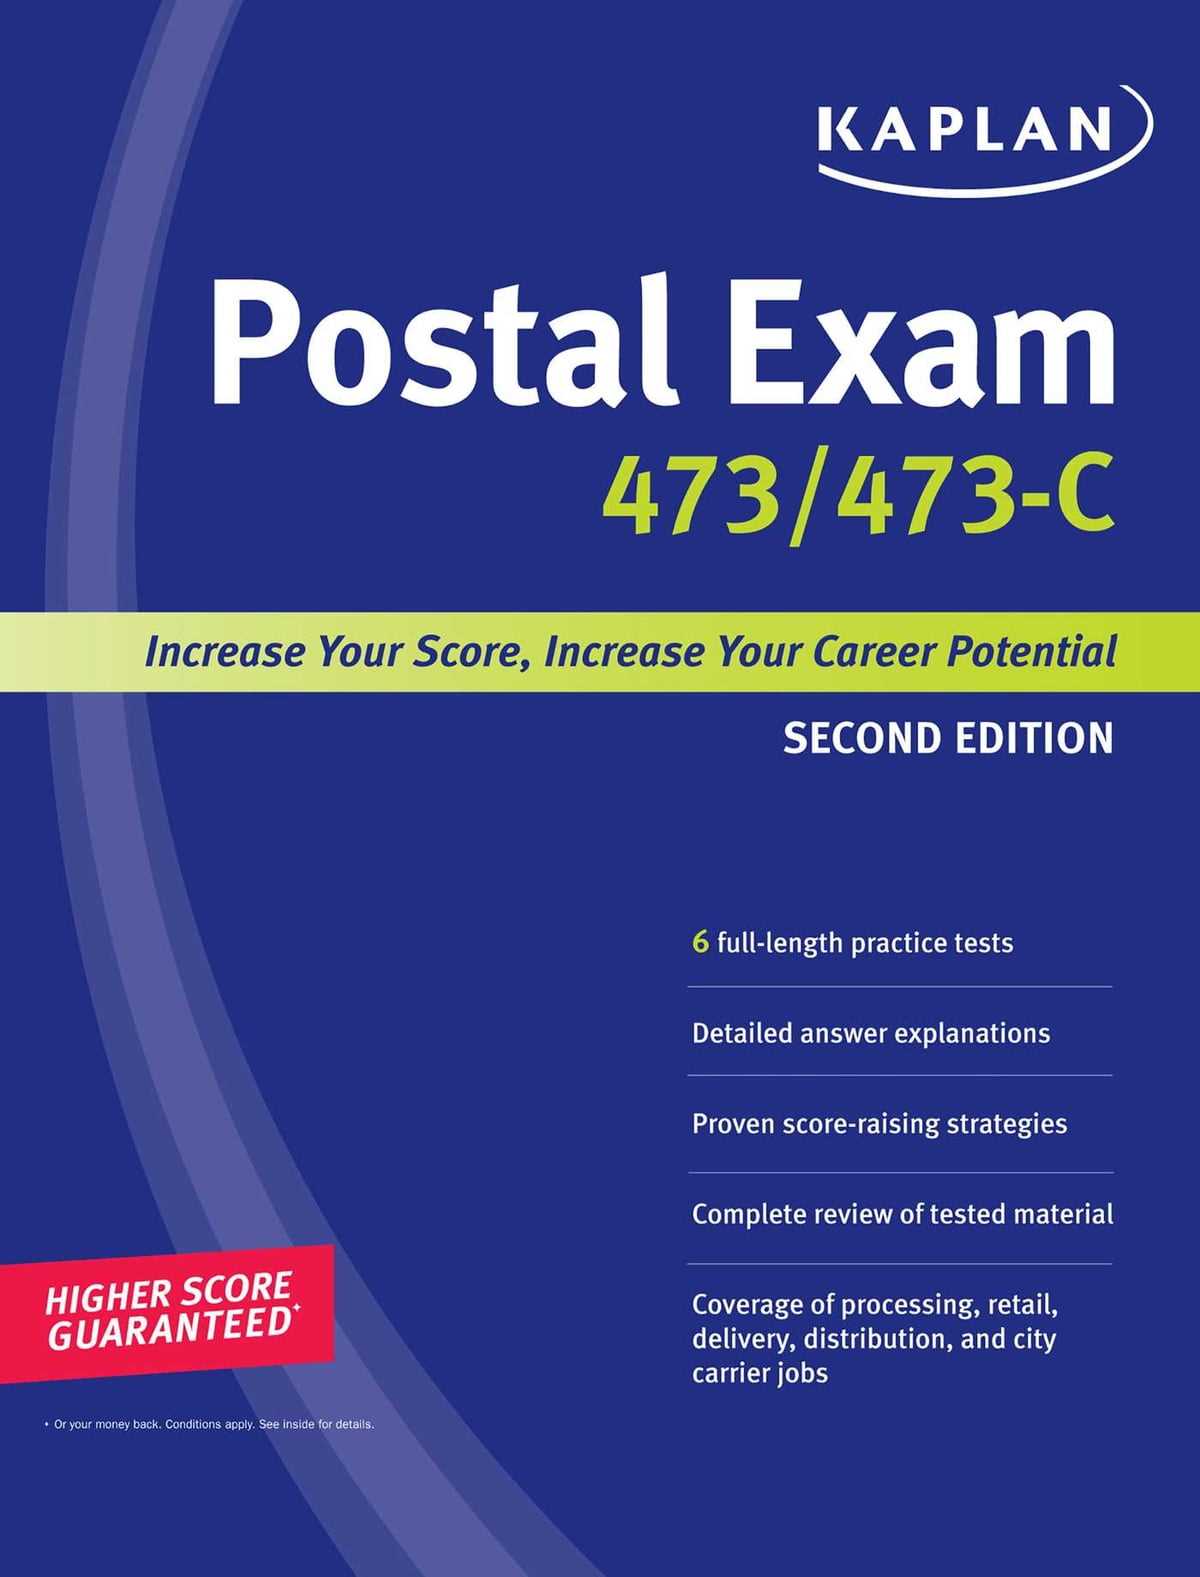 Overview of the 473 Postal Exam